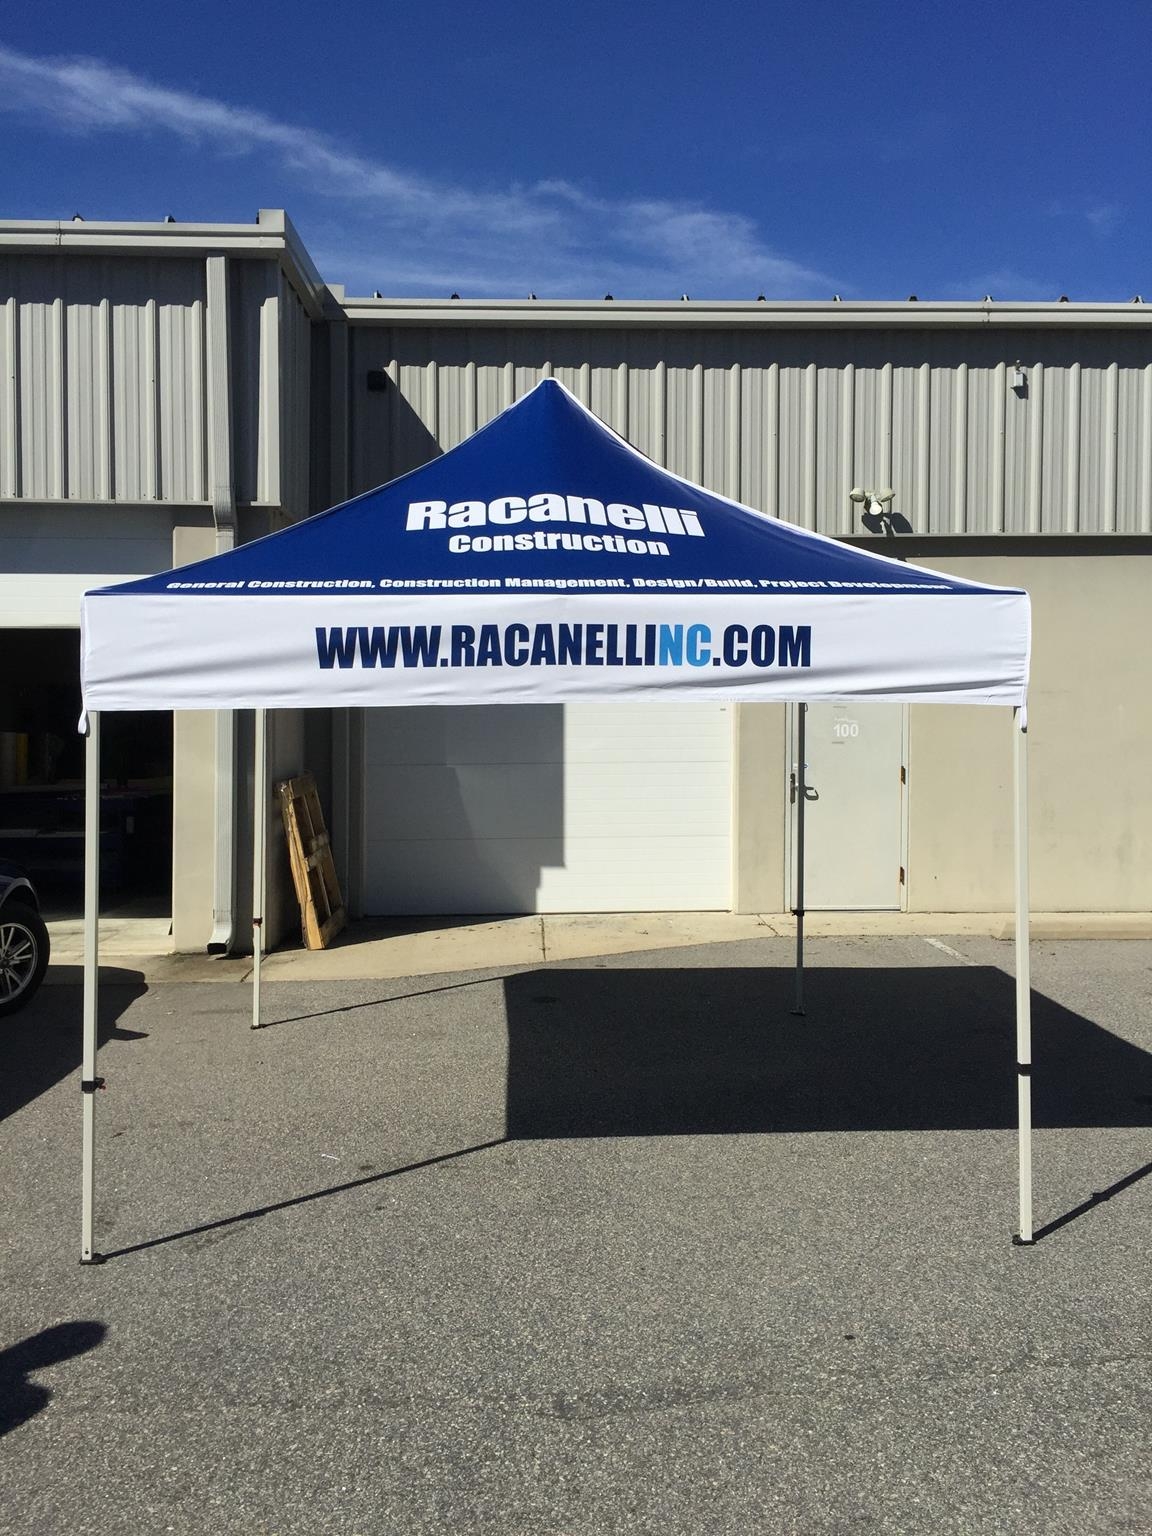 Business Details on Racanelli Canopy